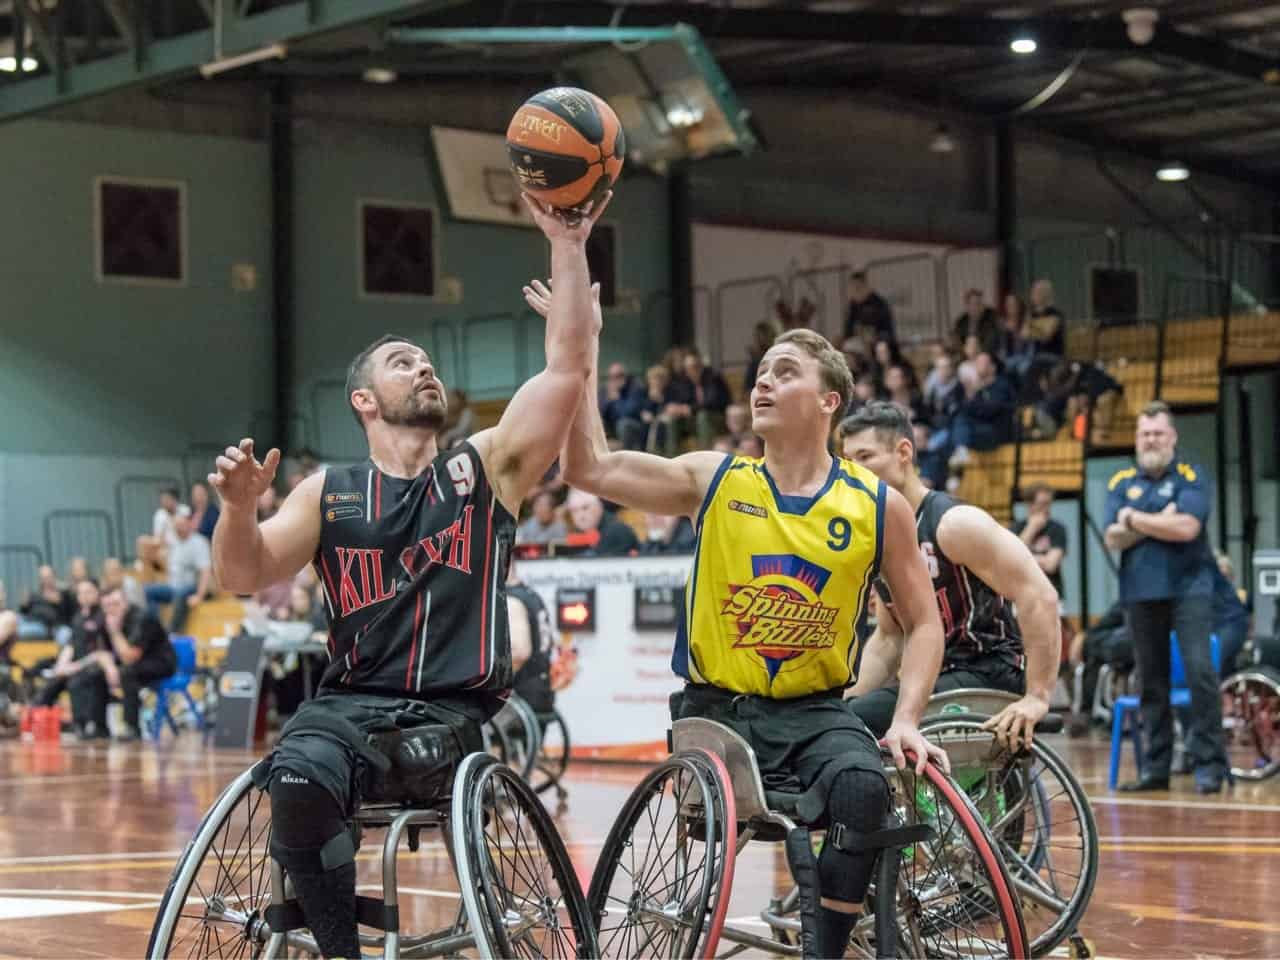 Two players compete for possession of the ball during a game of wheelchair basketball.